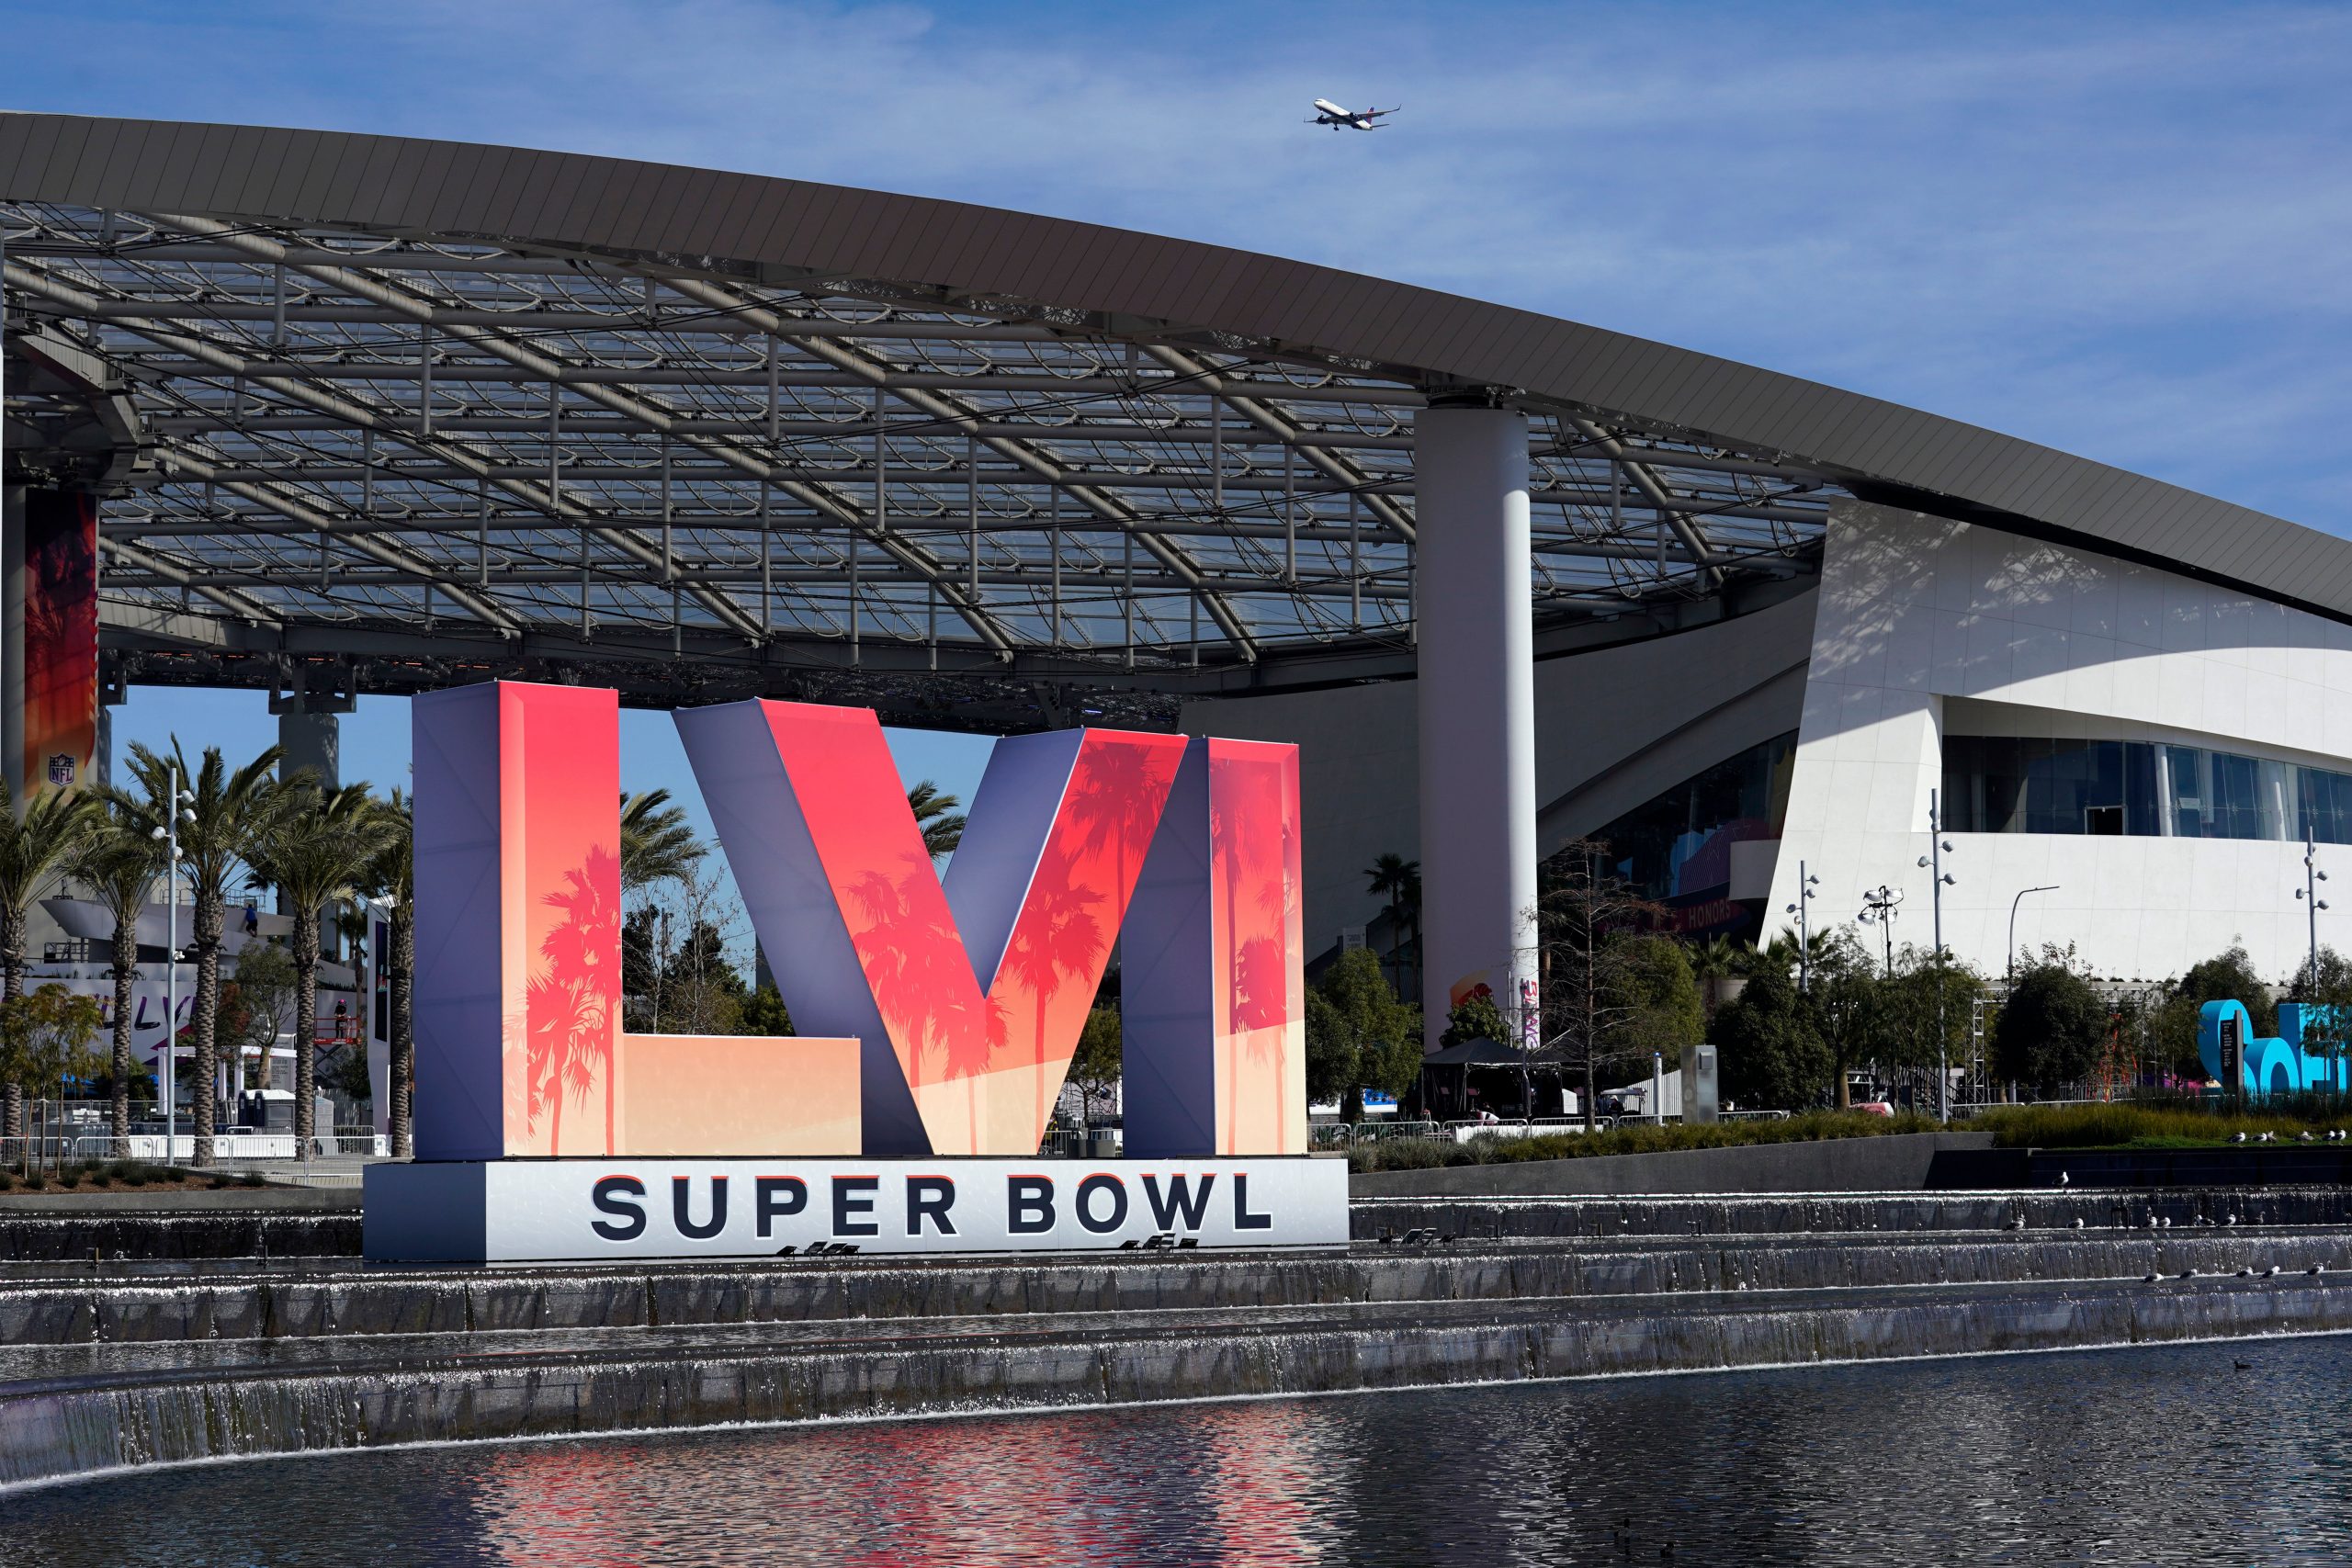 No known threats to Super Bowl or Los Angeles region: Authorities